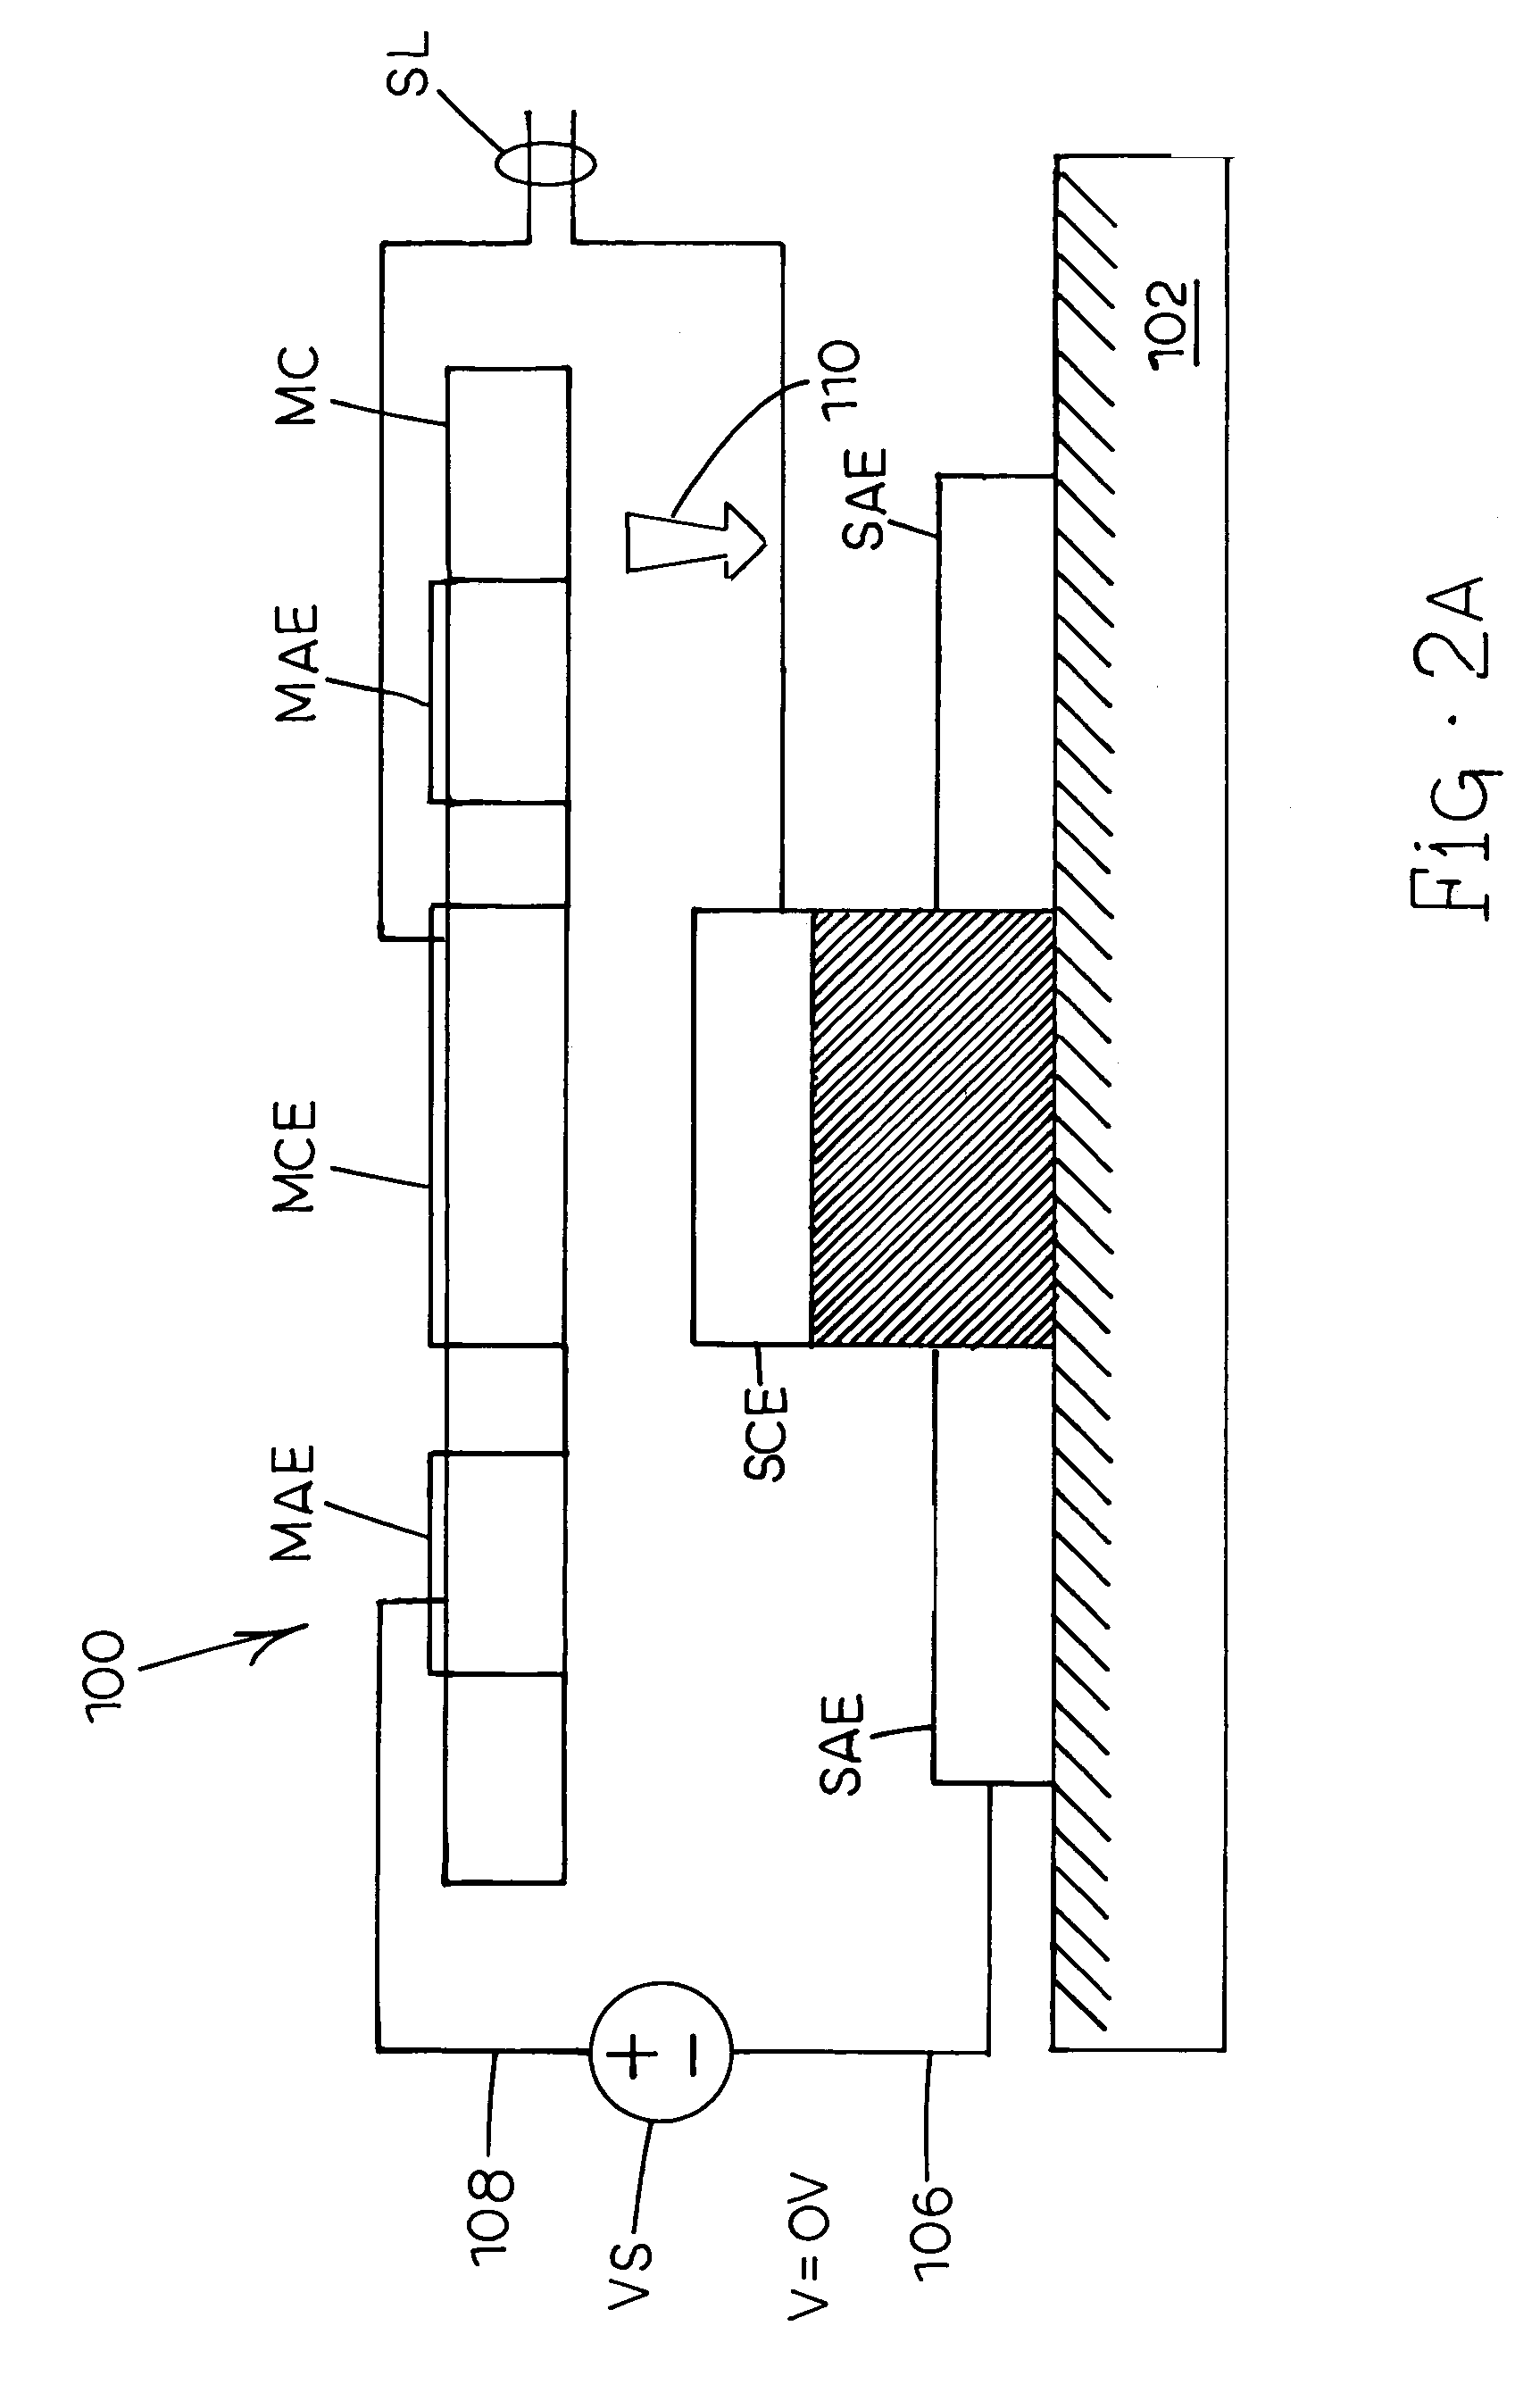 Micro-electro-mechanical system (MEMS) variable capacitor apparatuses, systems and related methods